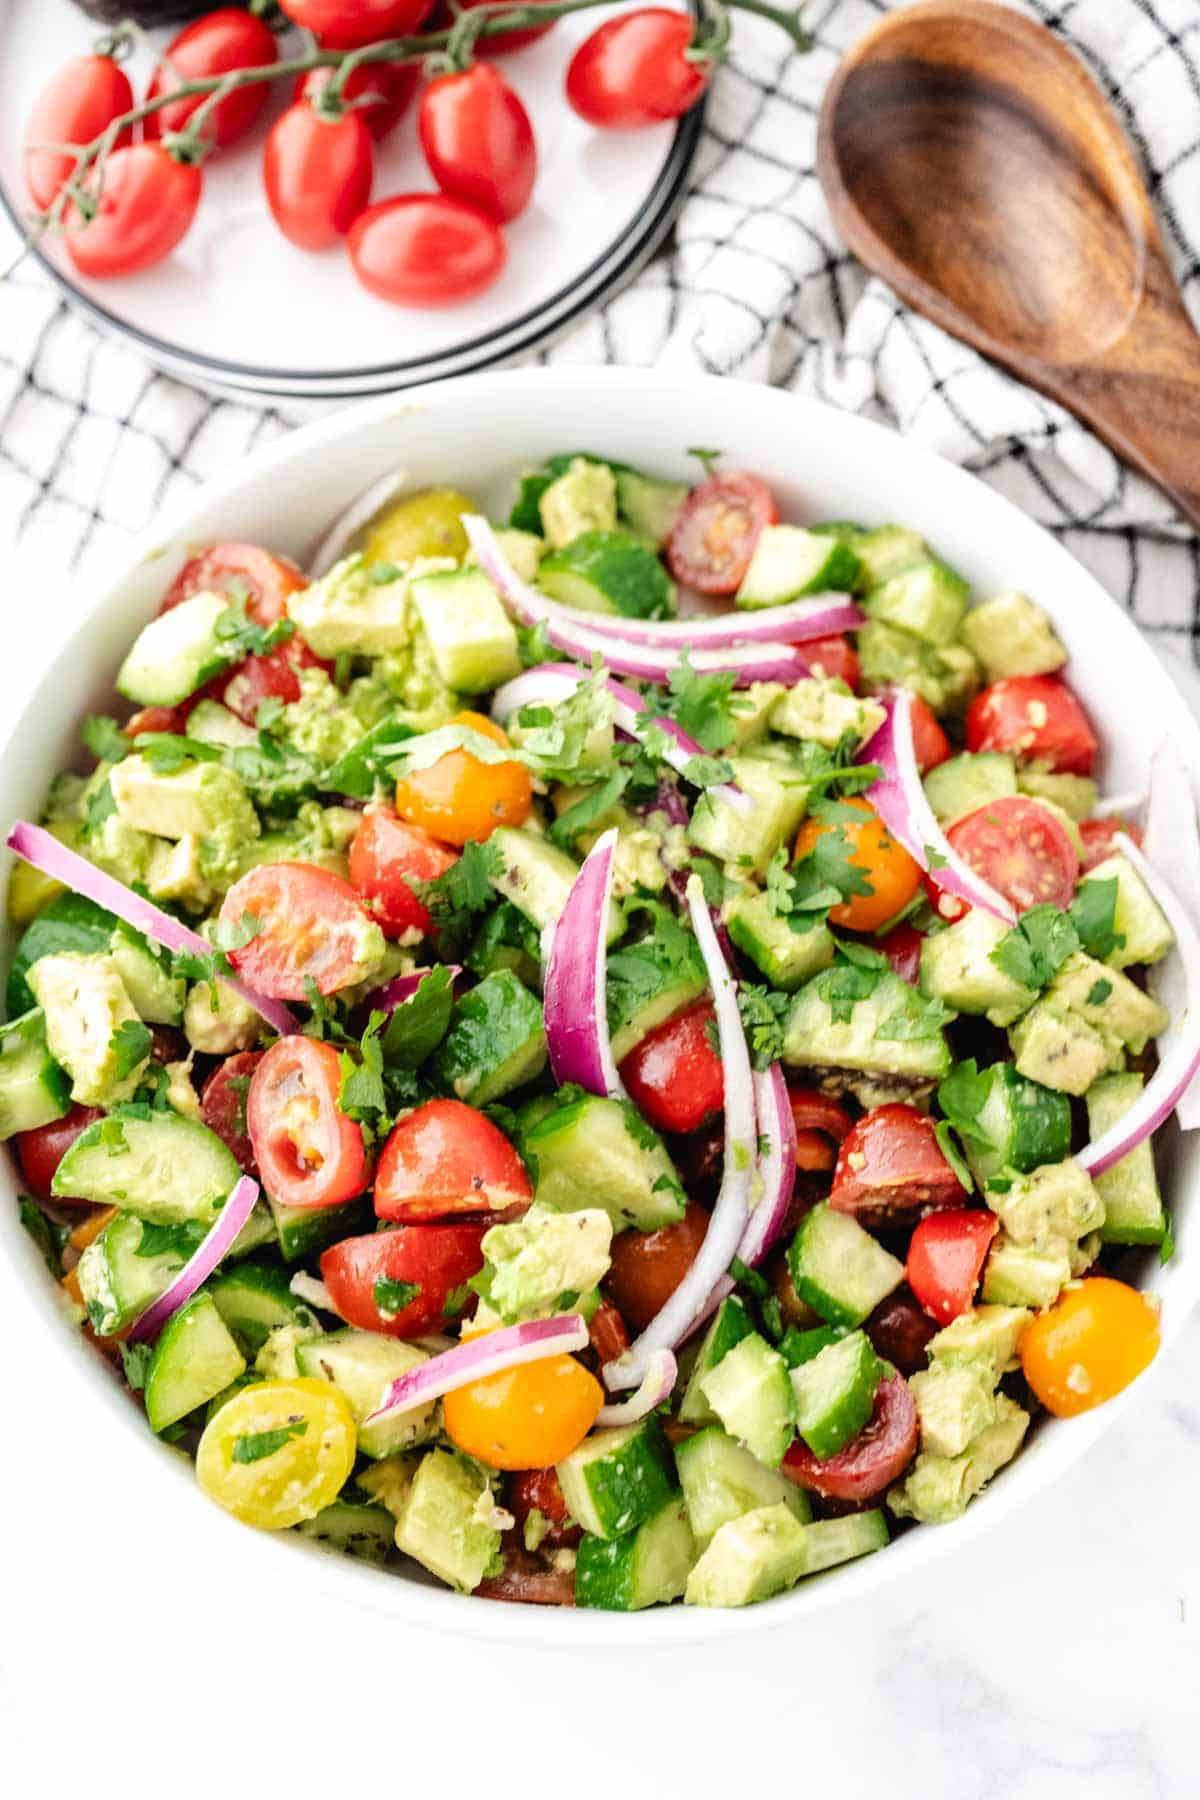 A cucumber tomato avocado salad tossed in a lemon vinaigrette dressing in a white serving bowl with a wooden spoon in the background.